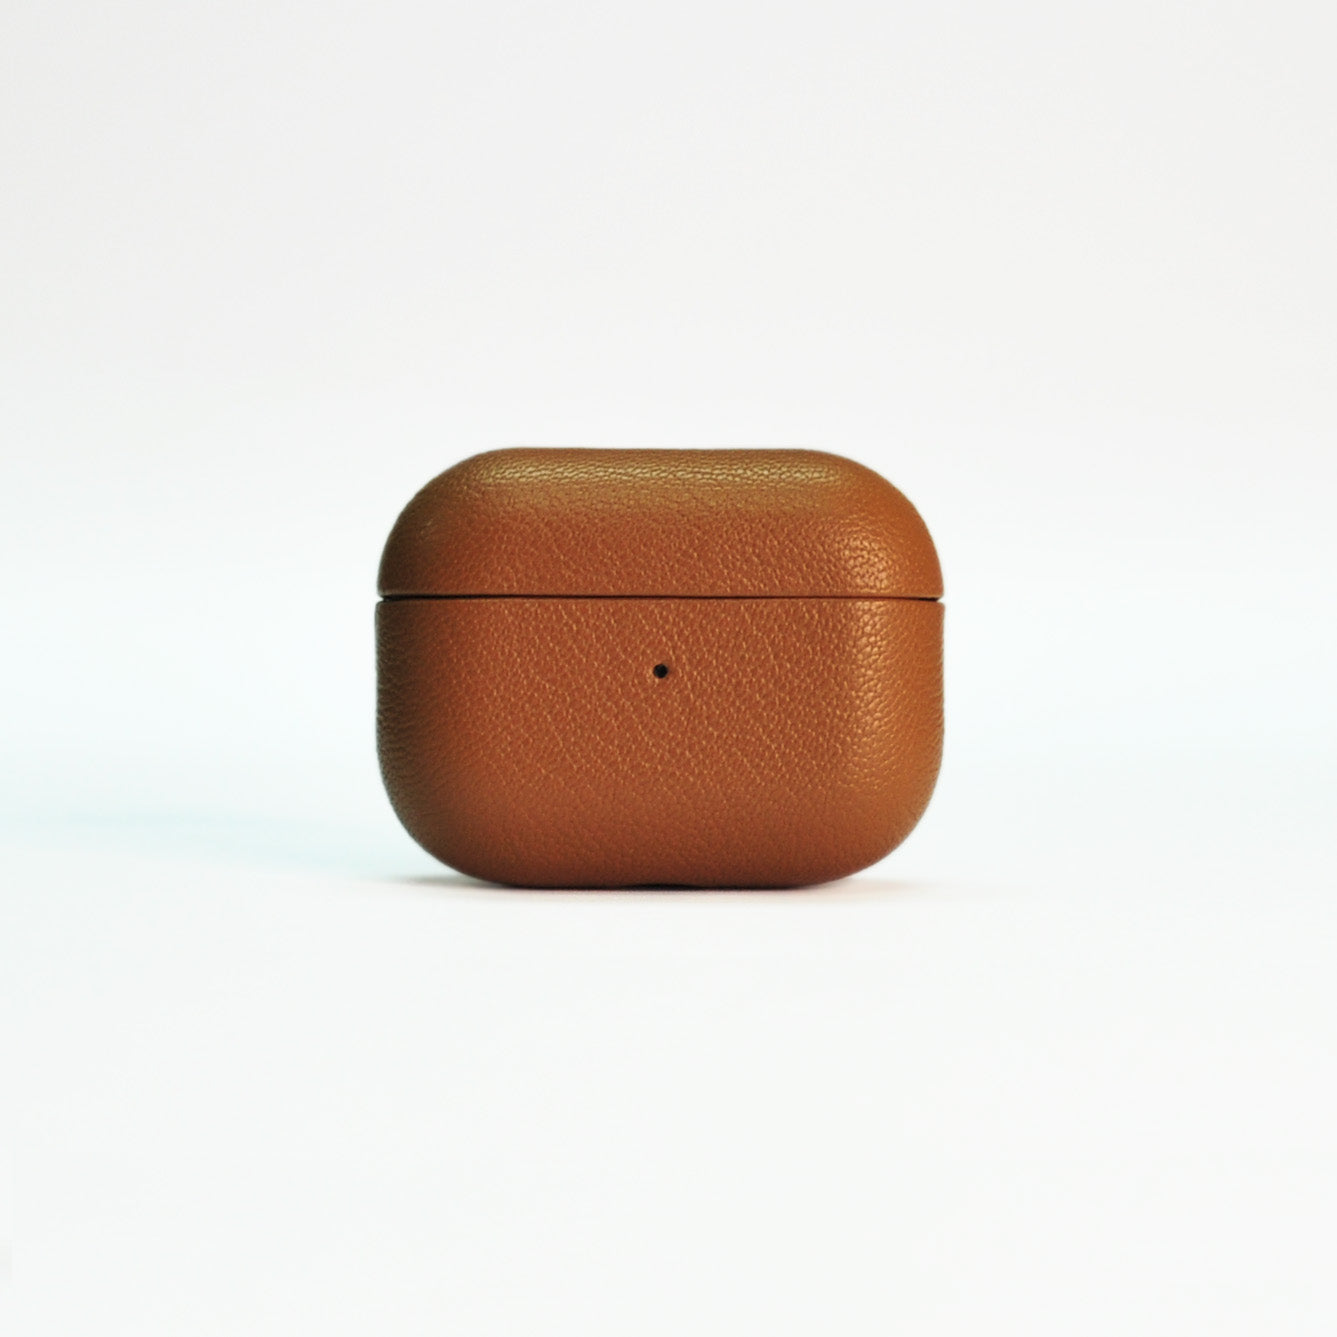 Chocolate Leather Airpod case for Pro 1st and 2nd generation